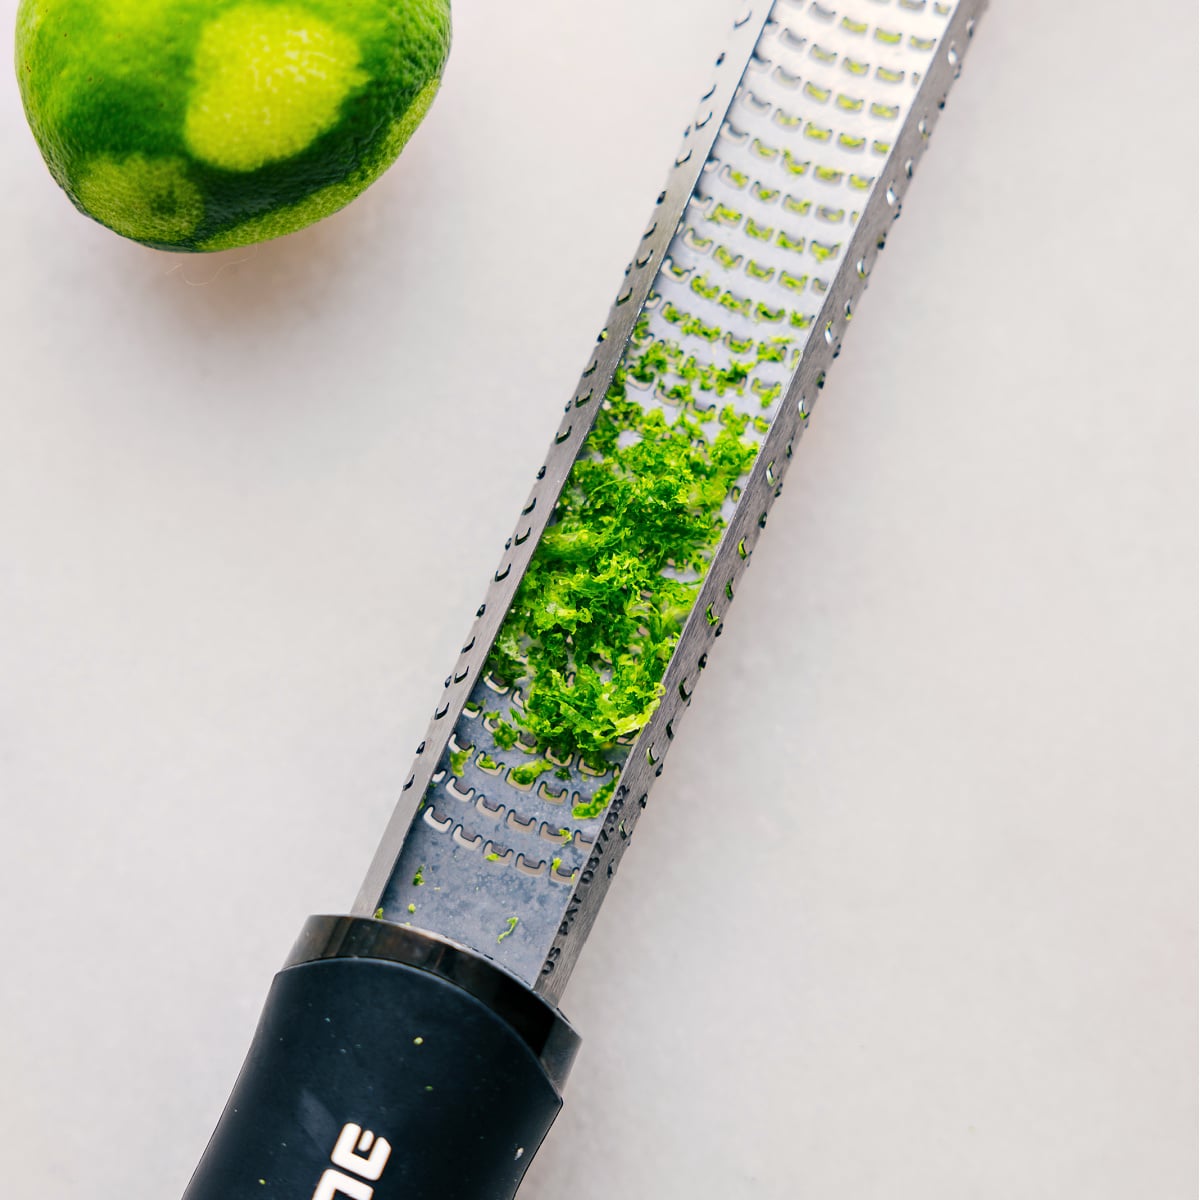 A zester tool covered in fine lime peel shavings, highlighting the fresh, green zest just removed from the fruit, ready for use in this recipe.